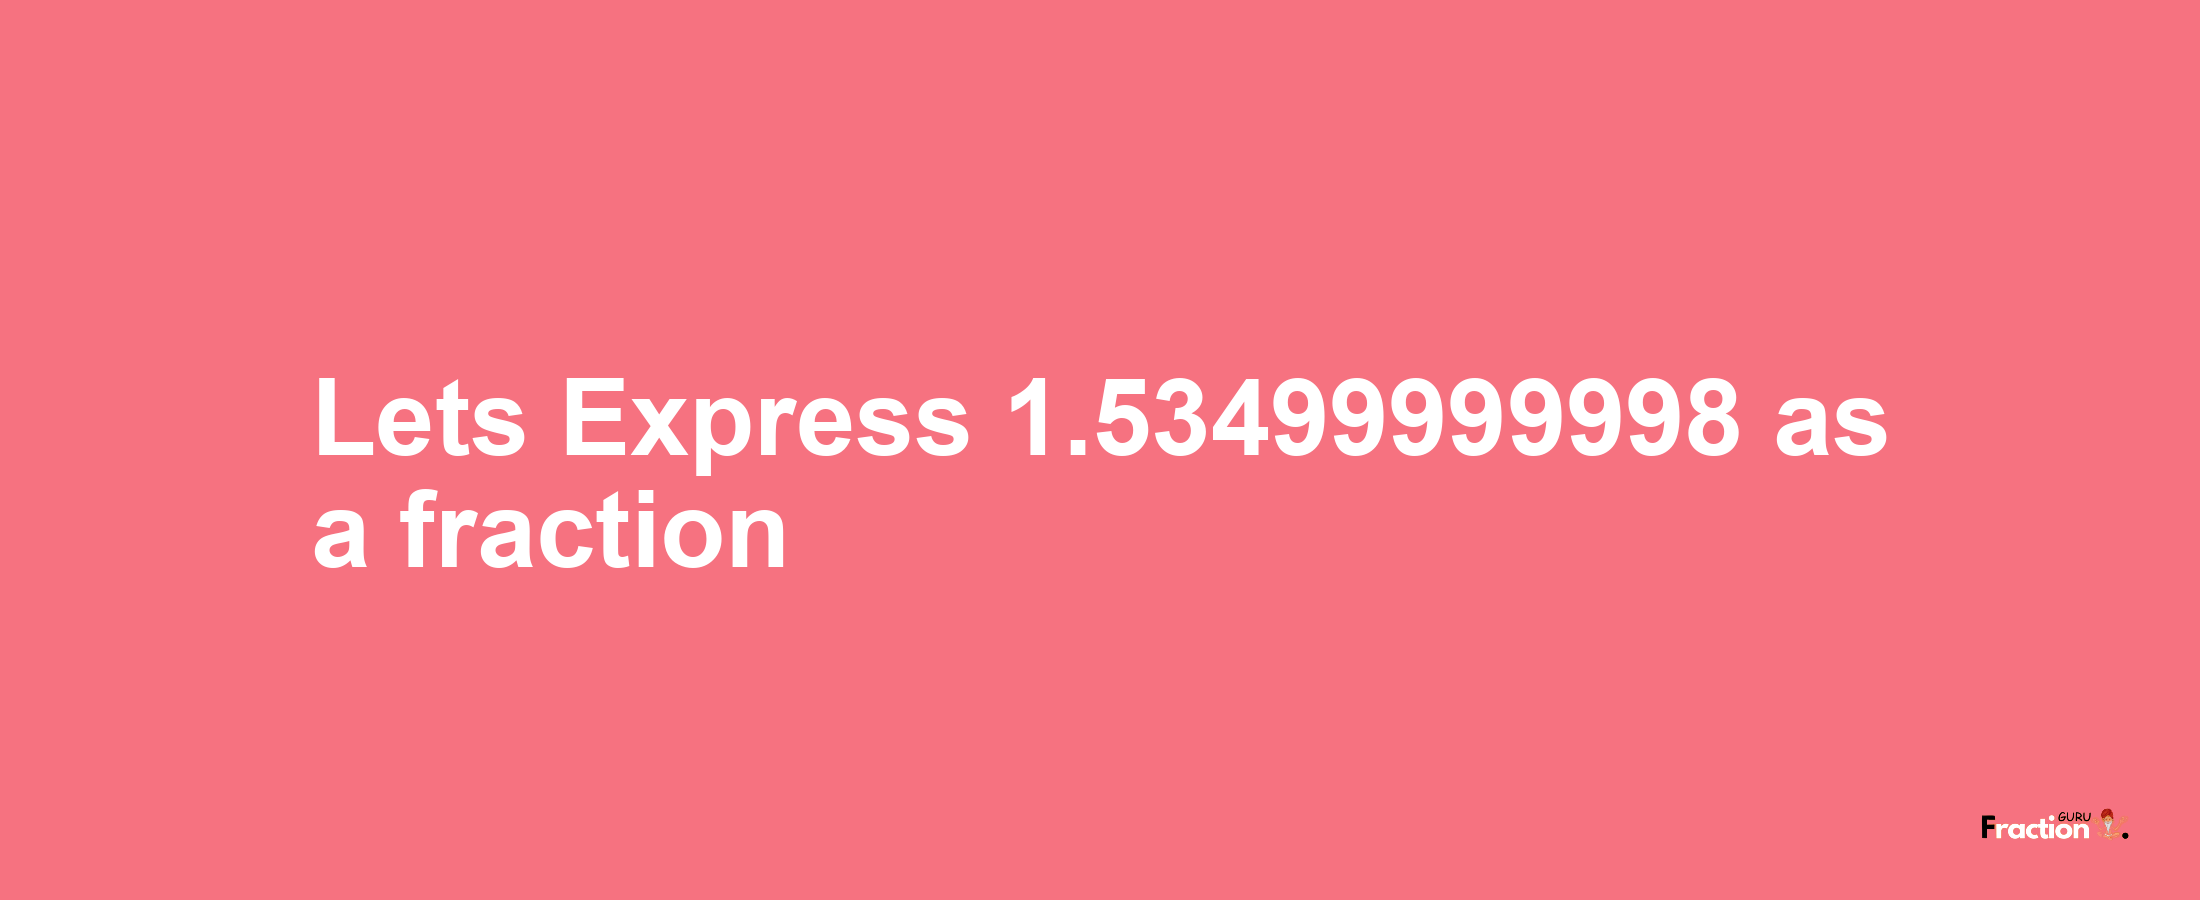 Lets Express 1.53499999998 as afraction